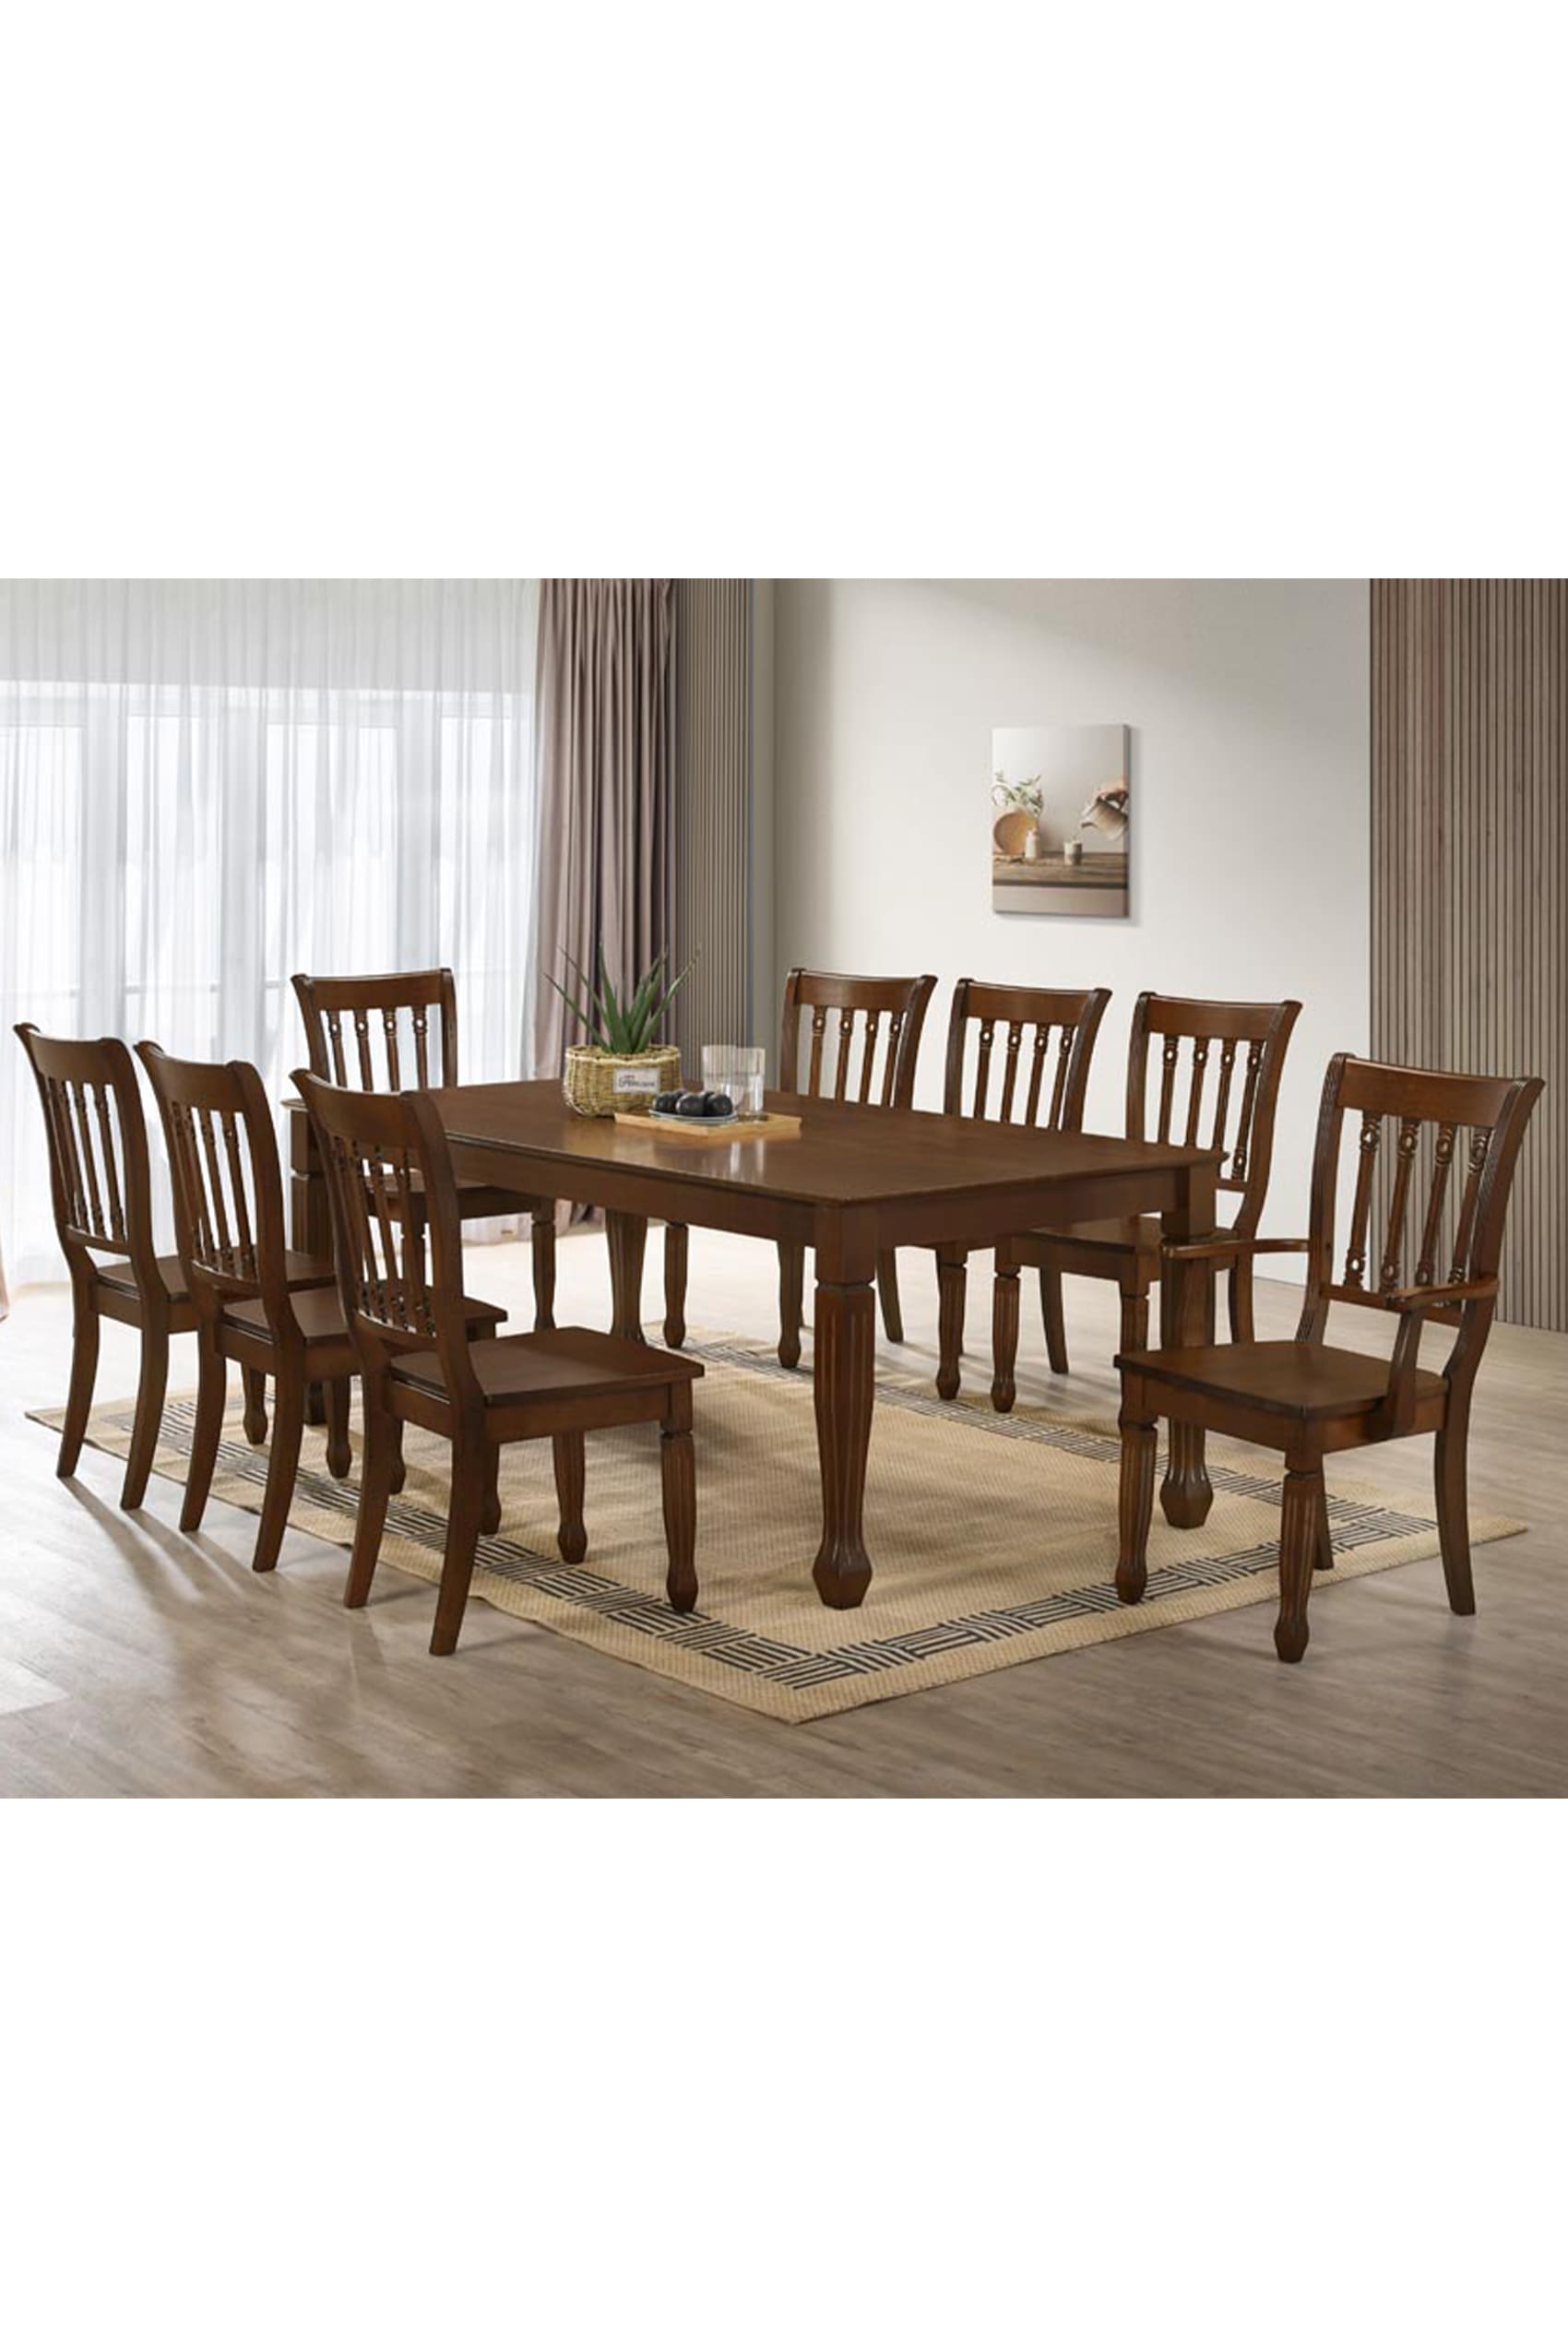 Liberi Dining Table + 6 Chiba Dining Chairs